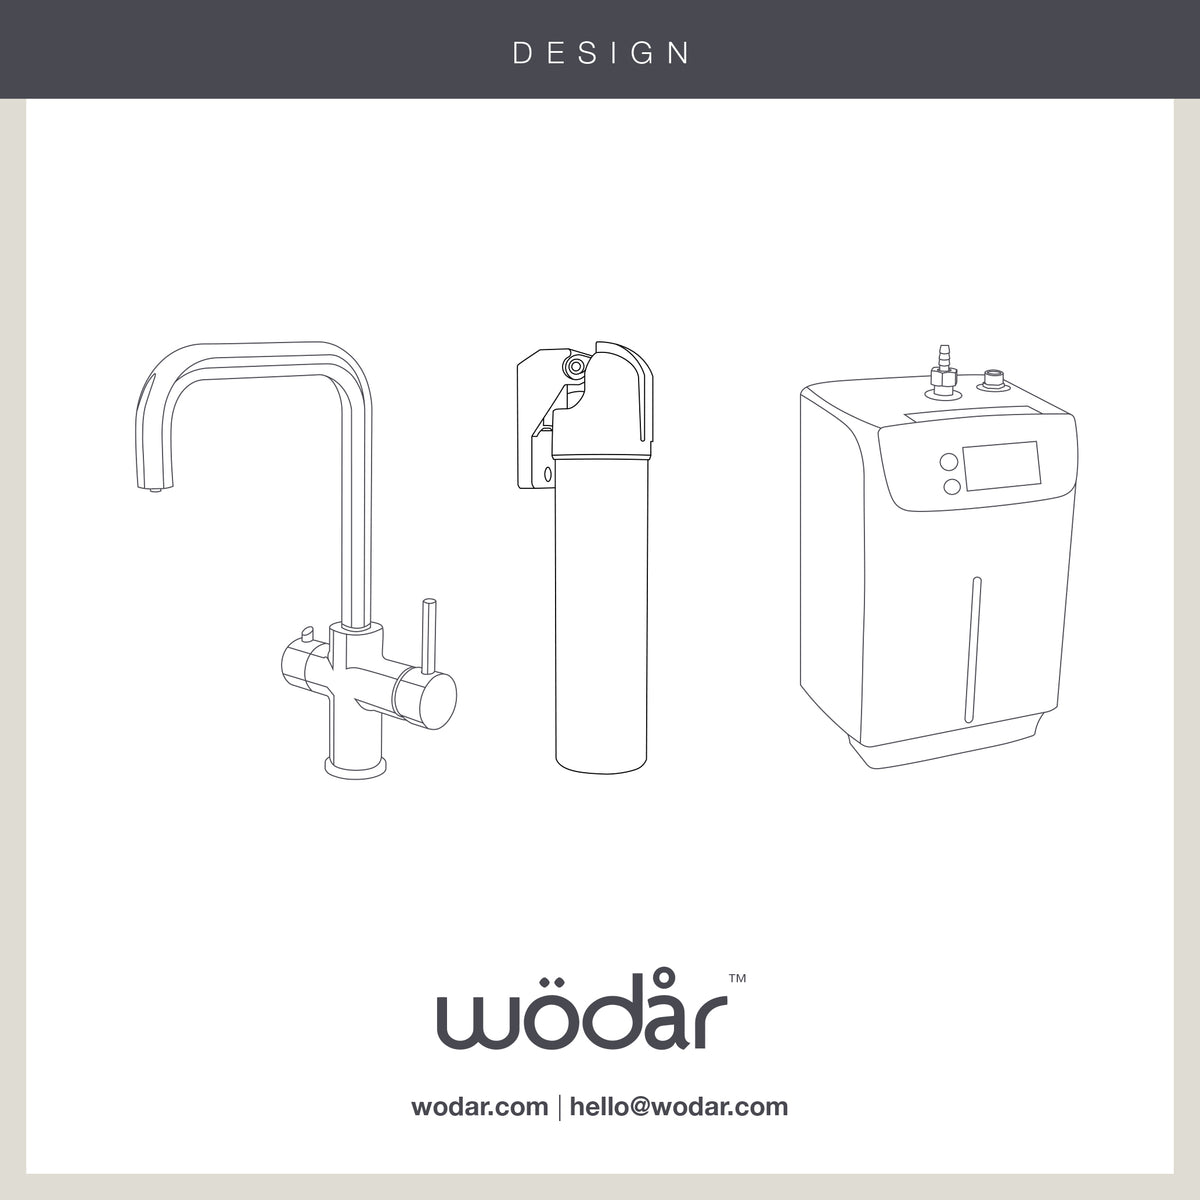 Design 3 in 1 Brushed Brass Boiling Hot Water Tap